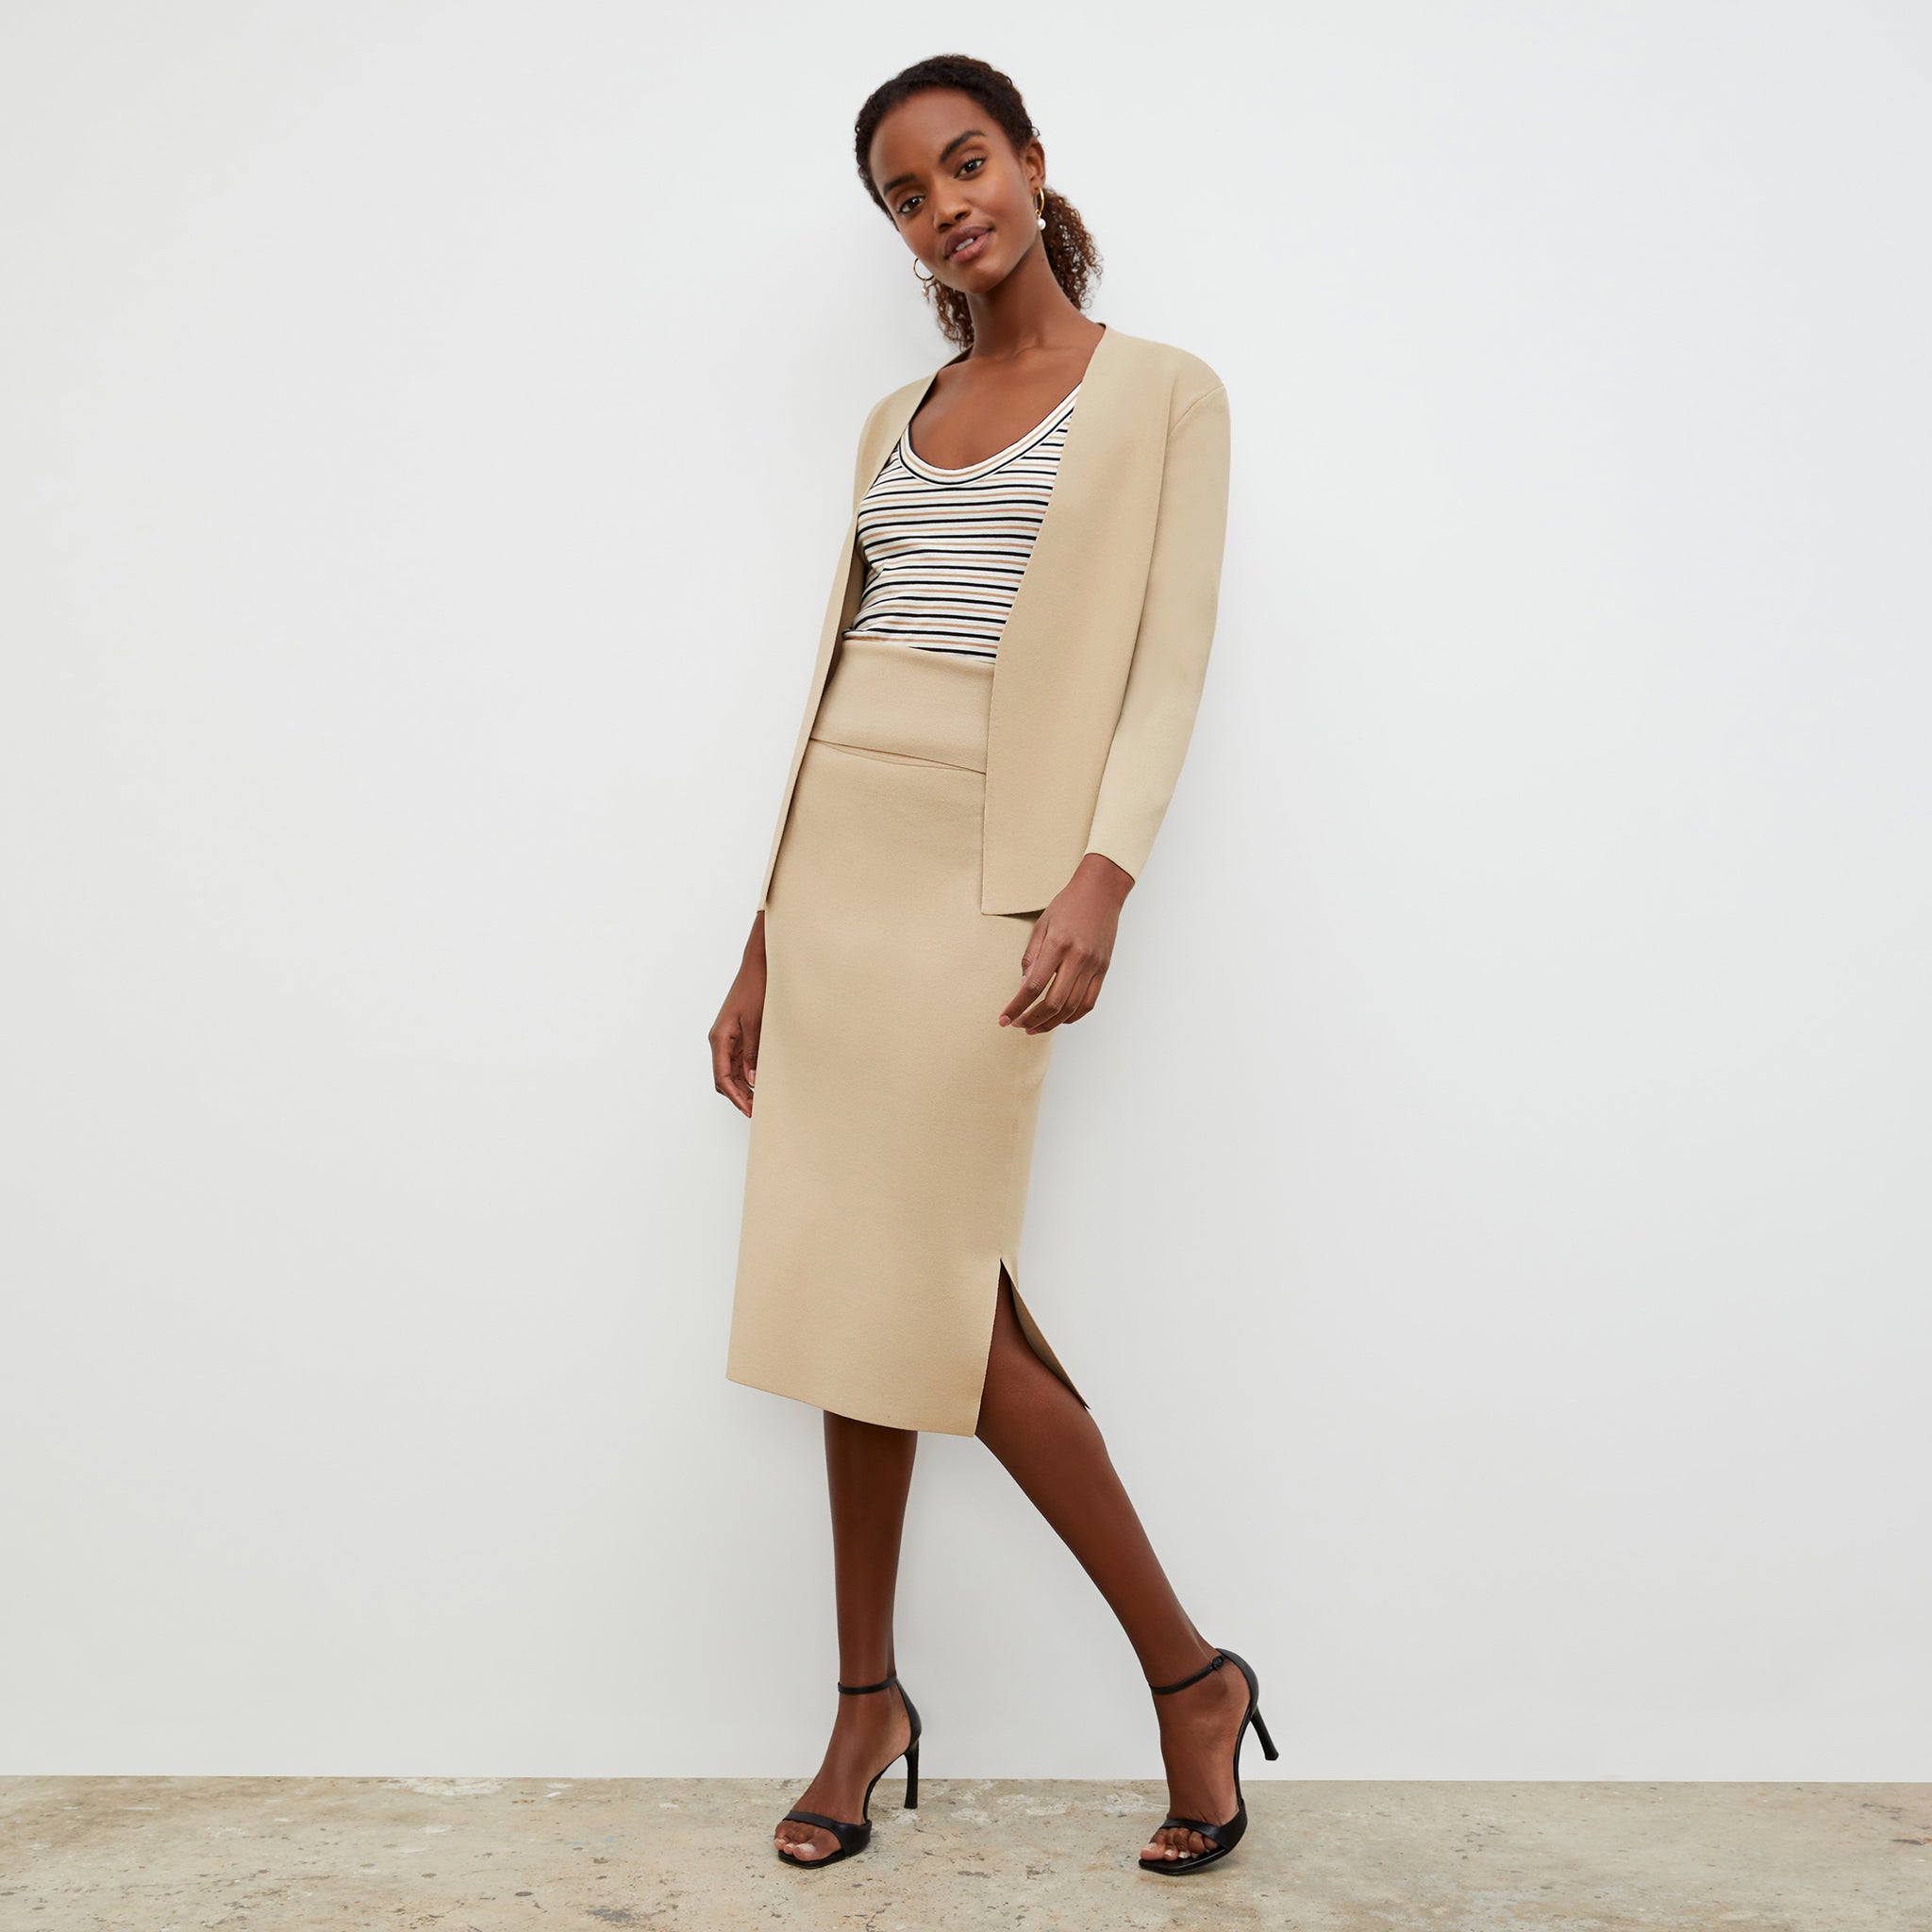 Front image of a woman wearing the Wyatt Tank - Thin Striped Pima Cotton in Tan / Black